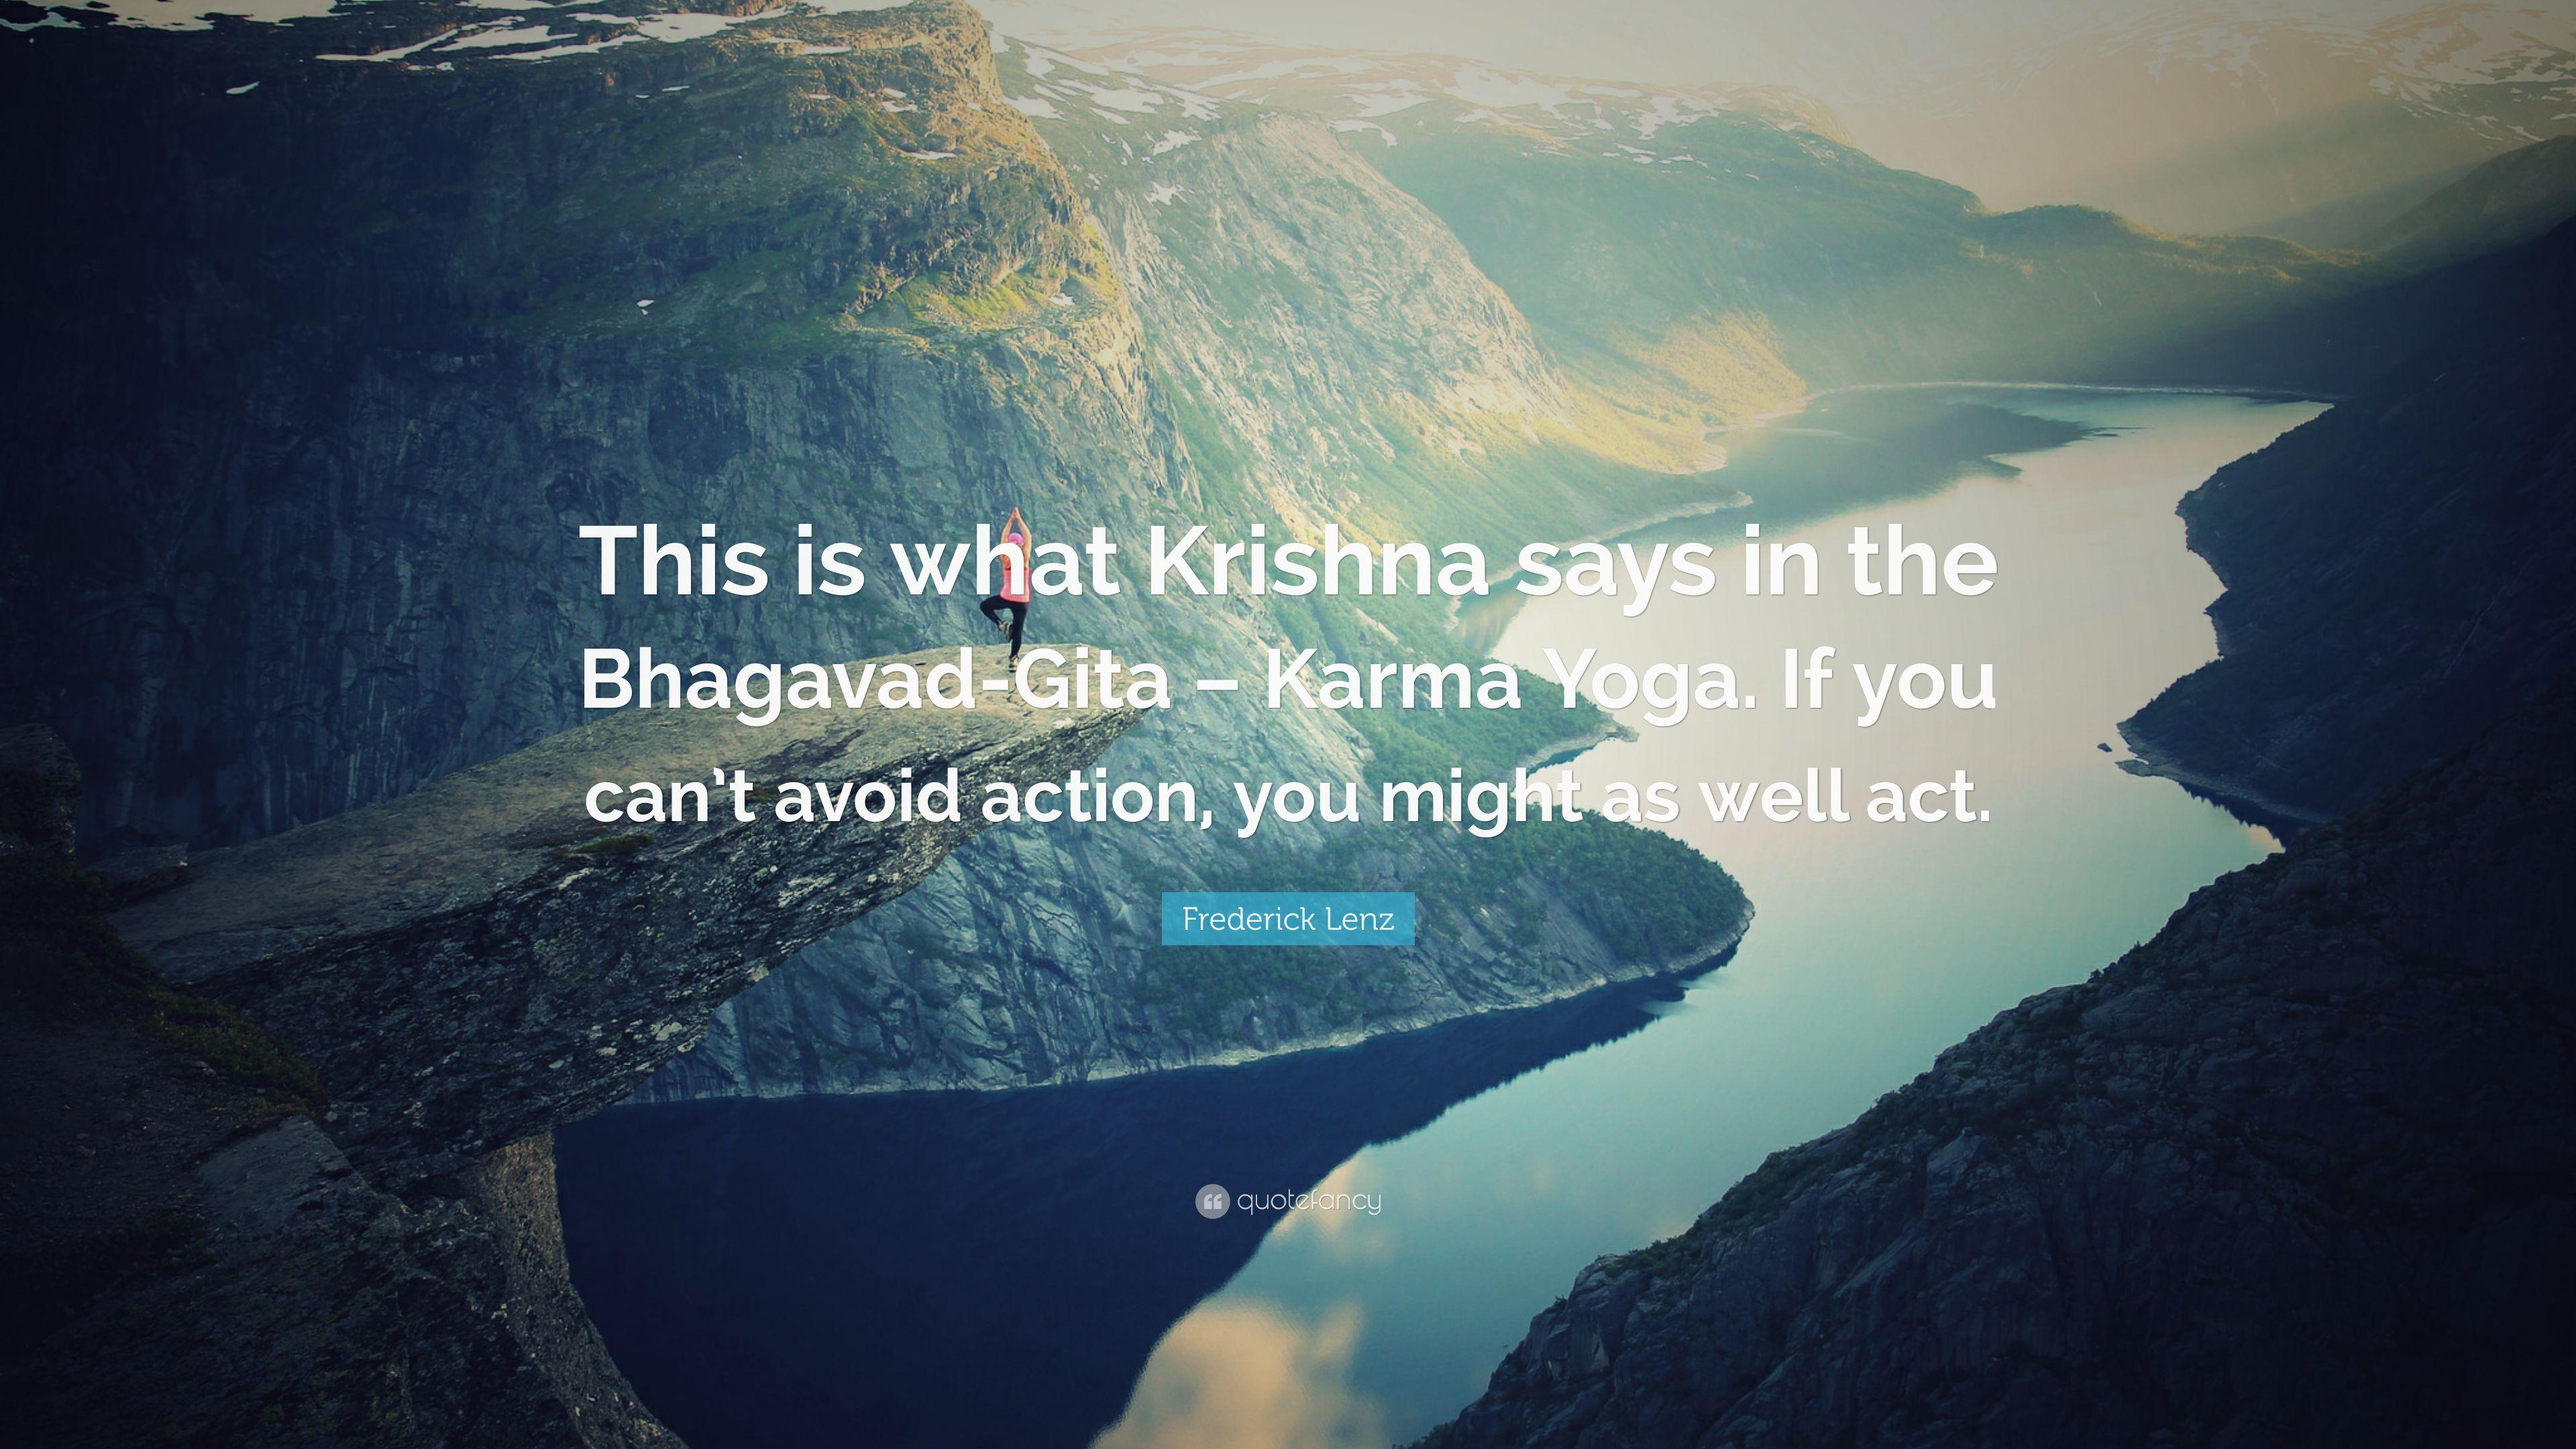 Frederick Lenz Quote: “This is what Krishna says in the Bhagavad